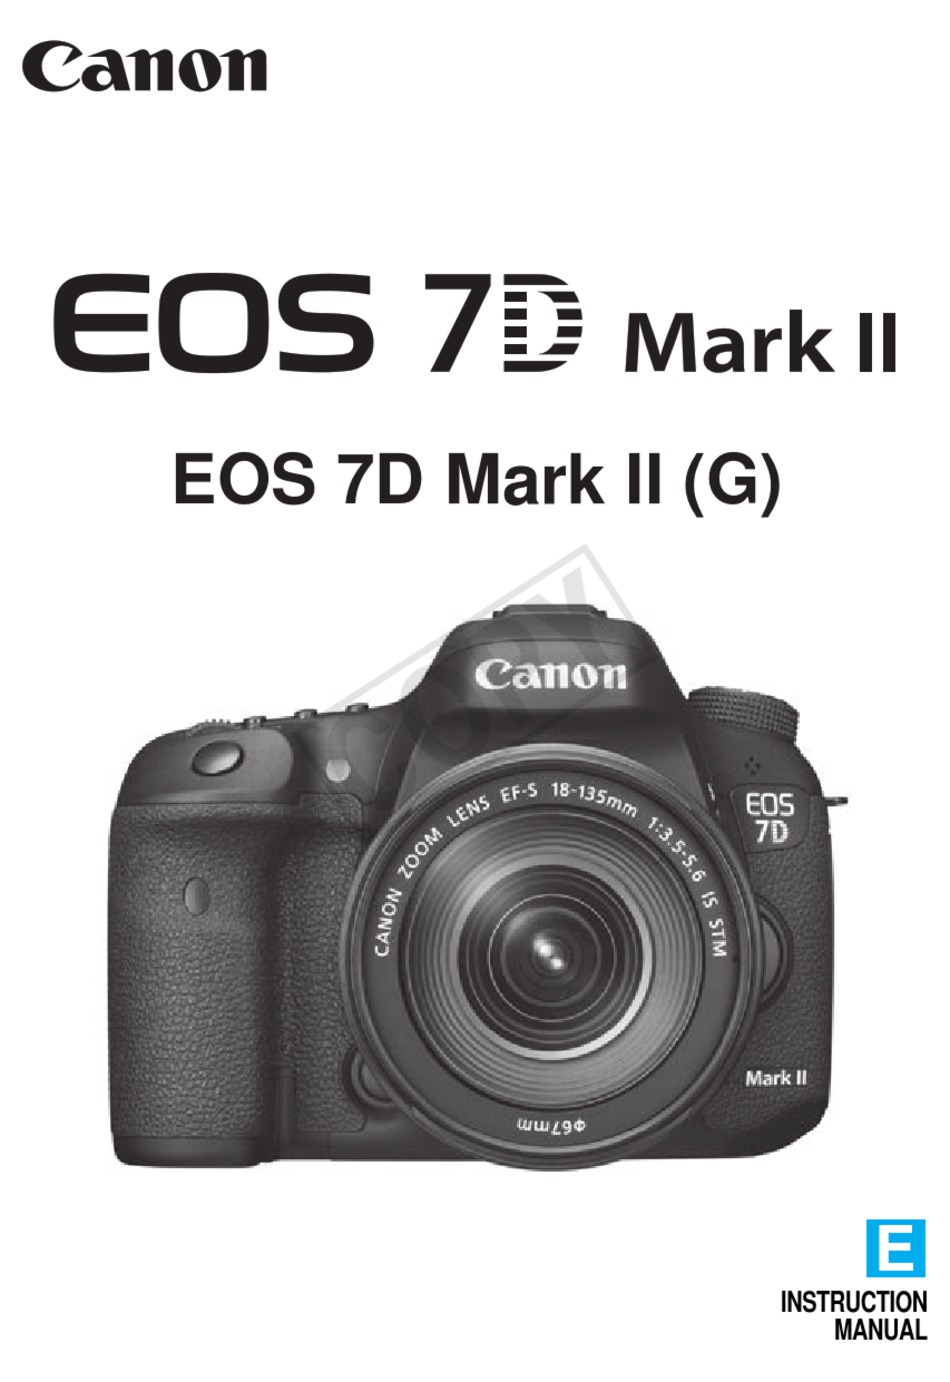 CANON  EOS 50D FULL USER GUIDE INSTRUCTION MANUAL  PRINTED 224 PAGES 